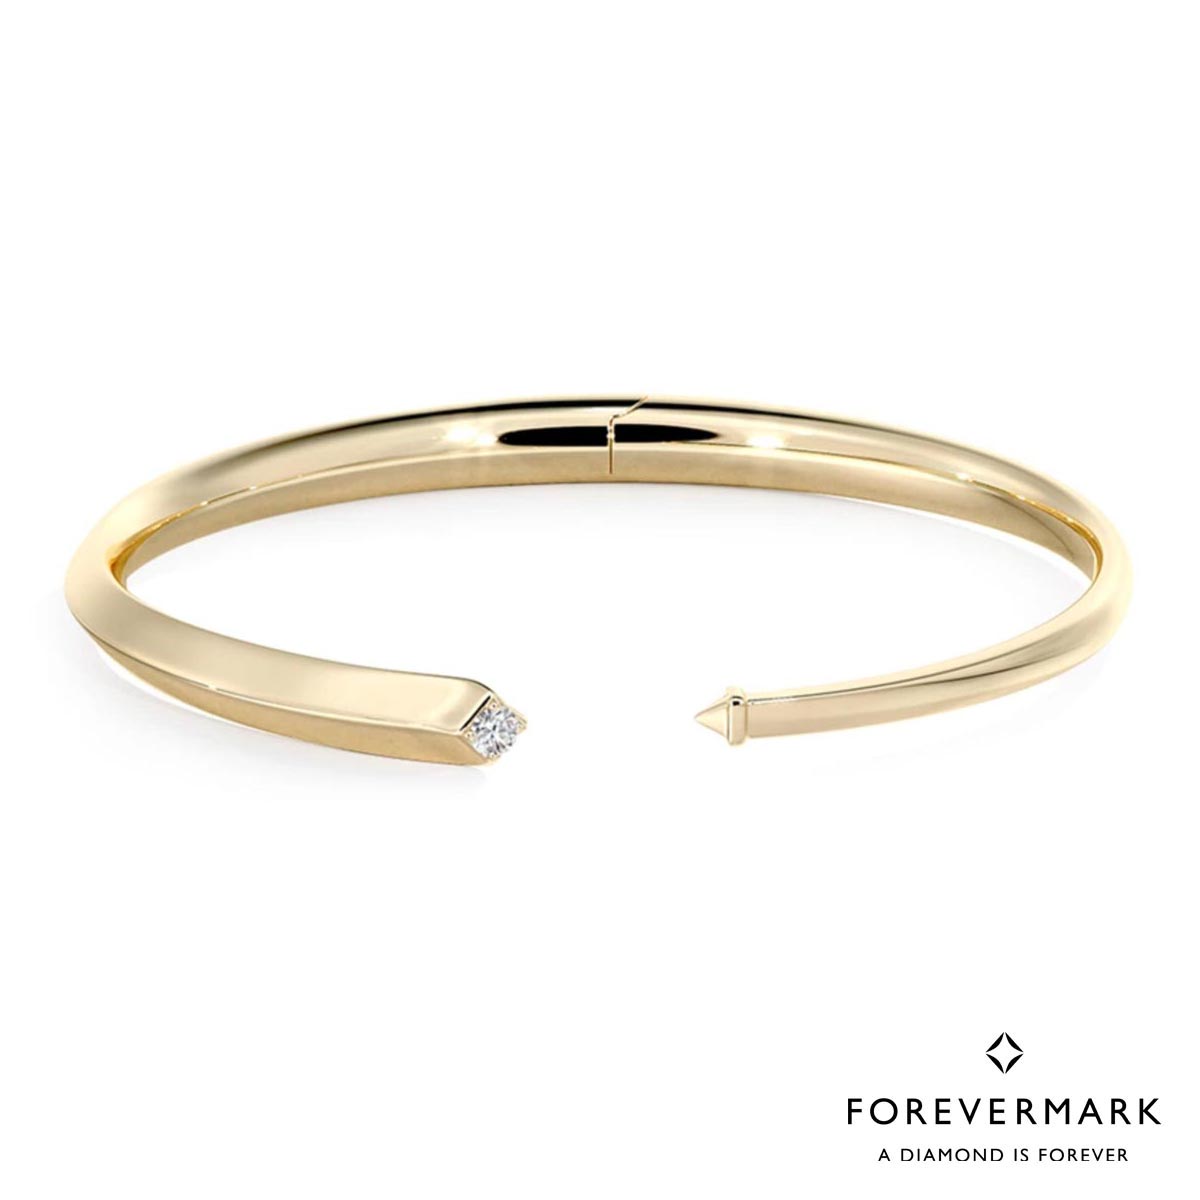 De Beers Forevermark Diamond Avaanti Closed Bangle in 18kt Yellow Gold (1/10ct)